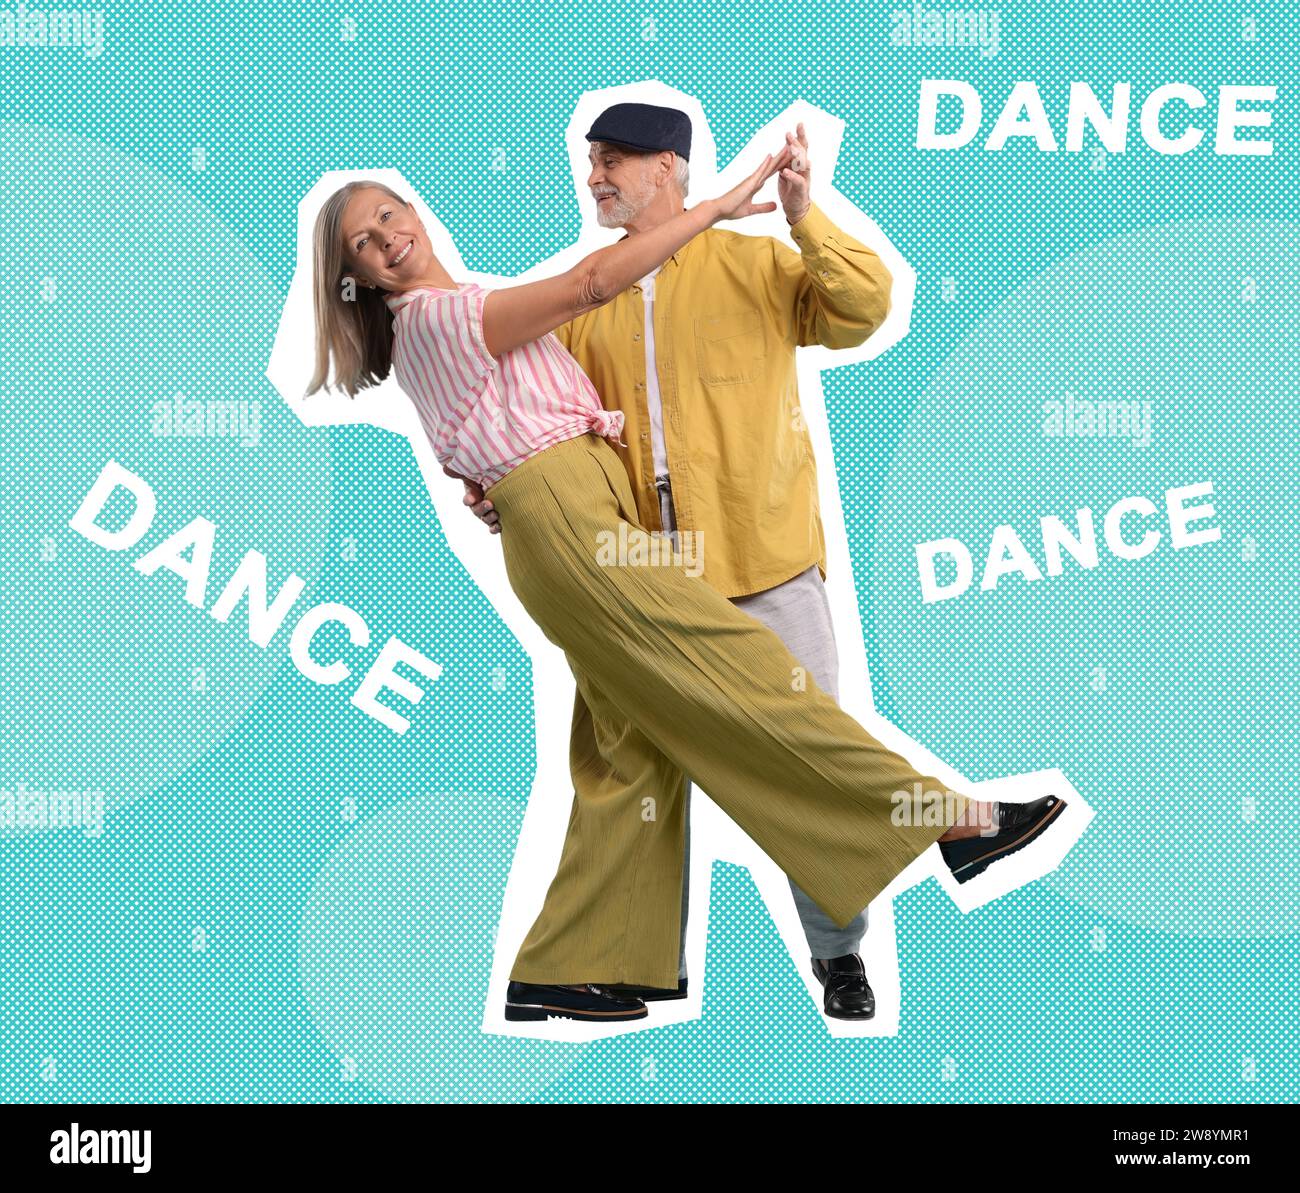 Happy couple dancing on bright background. Creative collage with stylish mature man and woman. Concept of music, energy, party, fashion, lifestyle Stock Photo